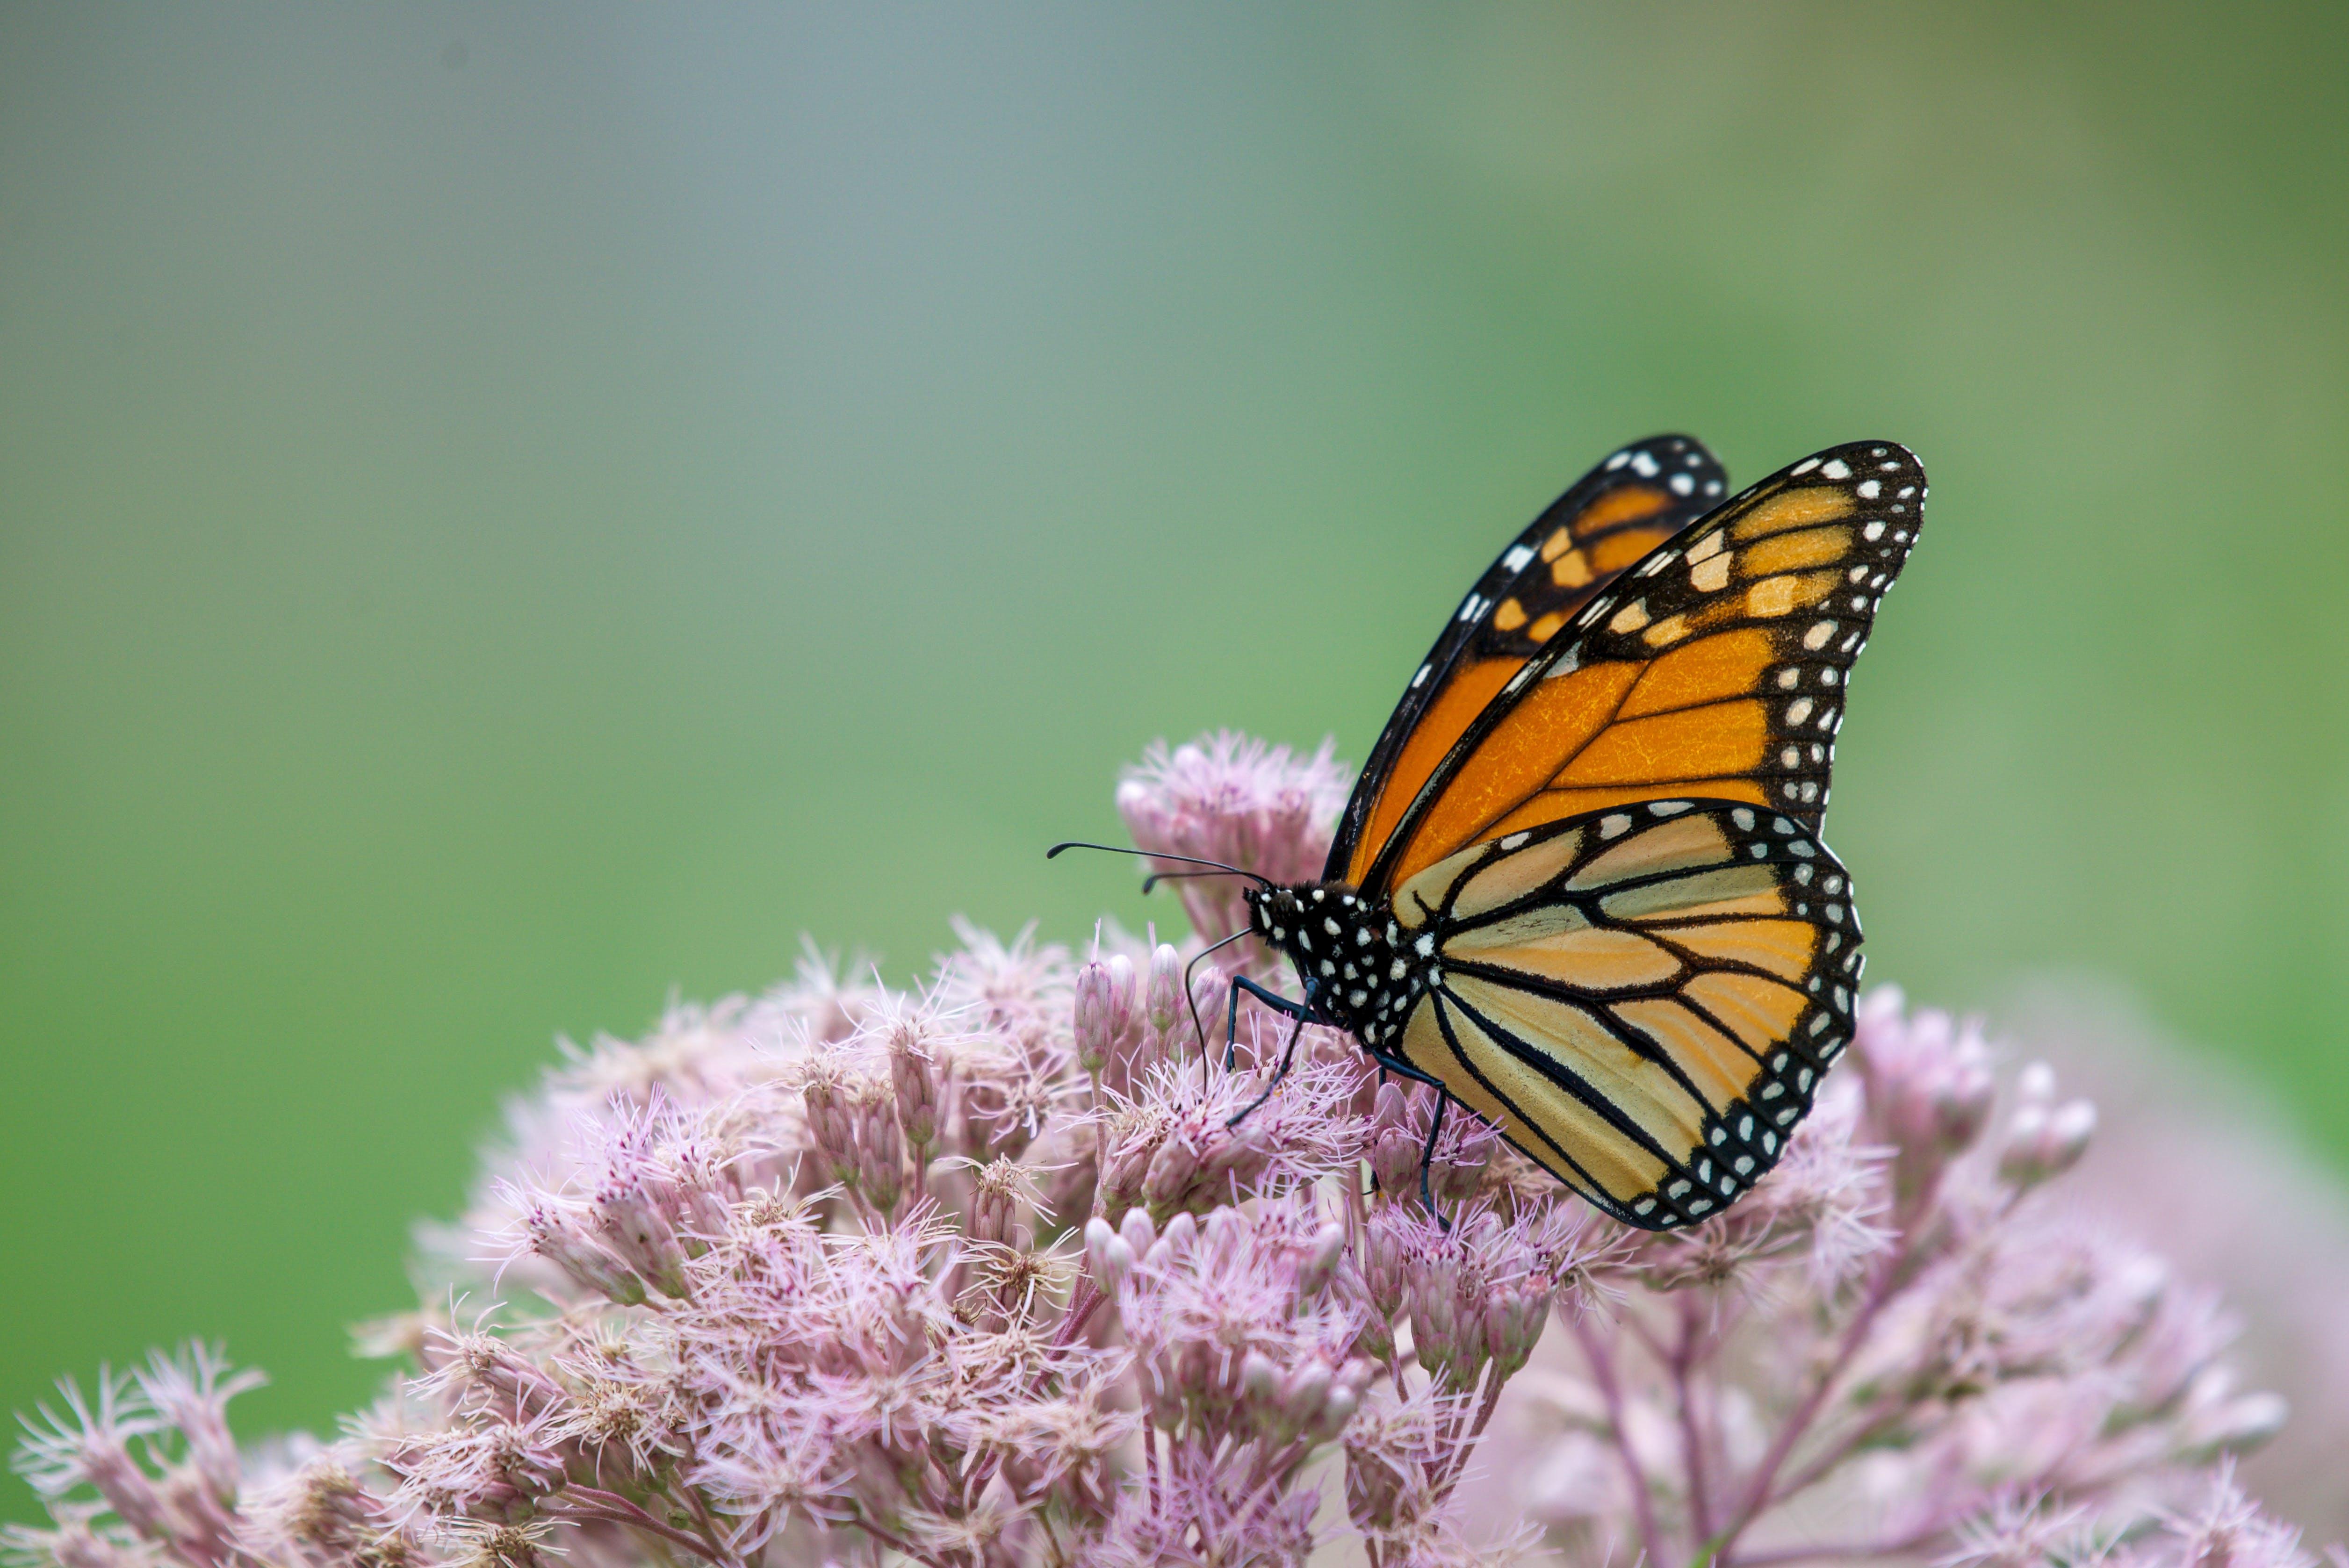 Which of the following is the biggest threat to monarch butterflies? 